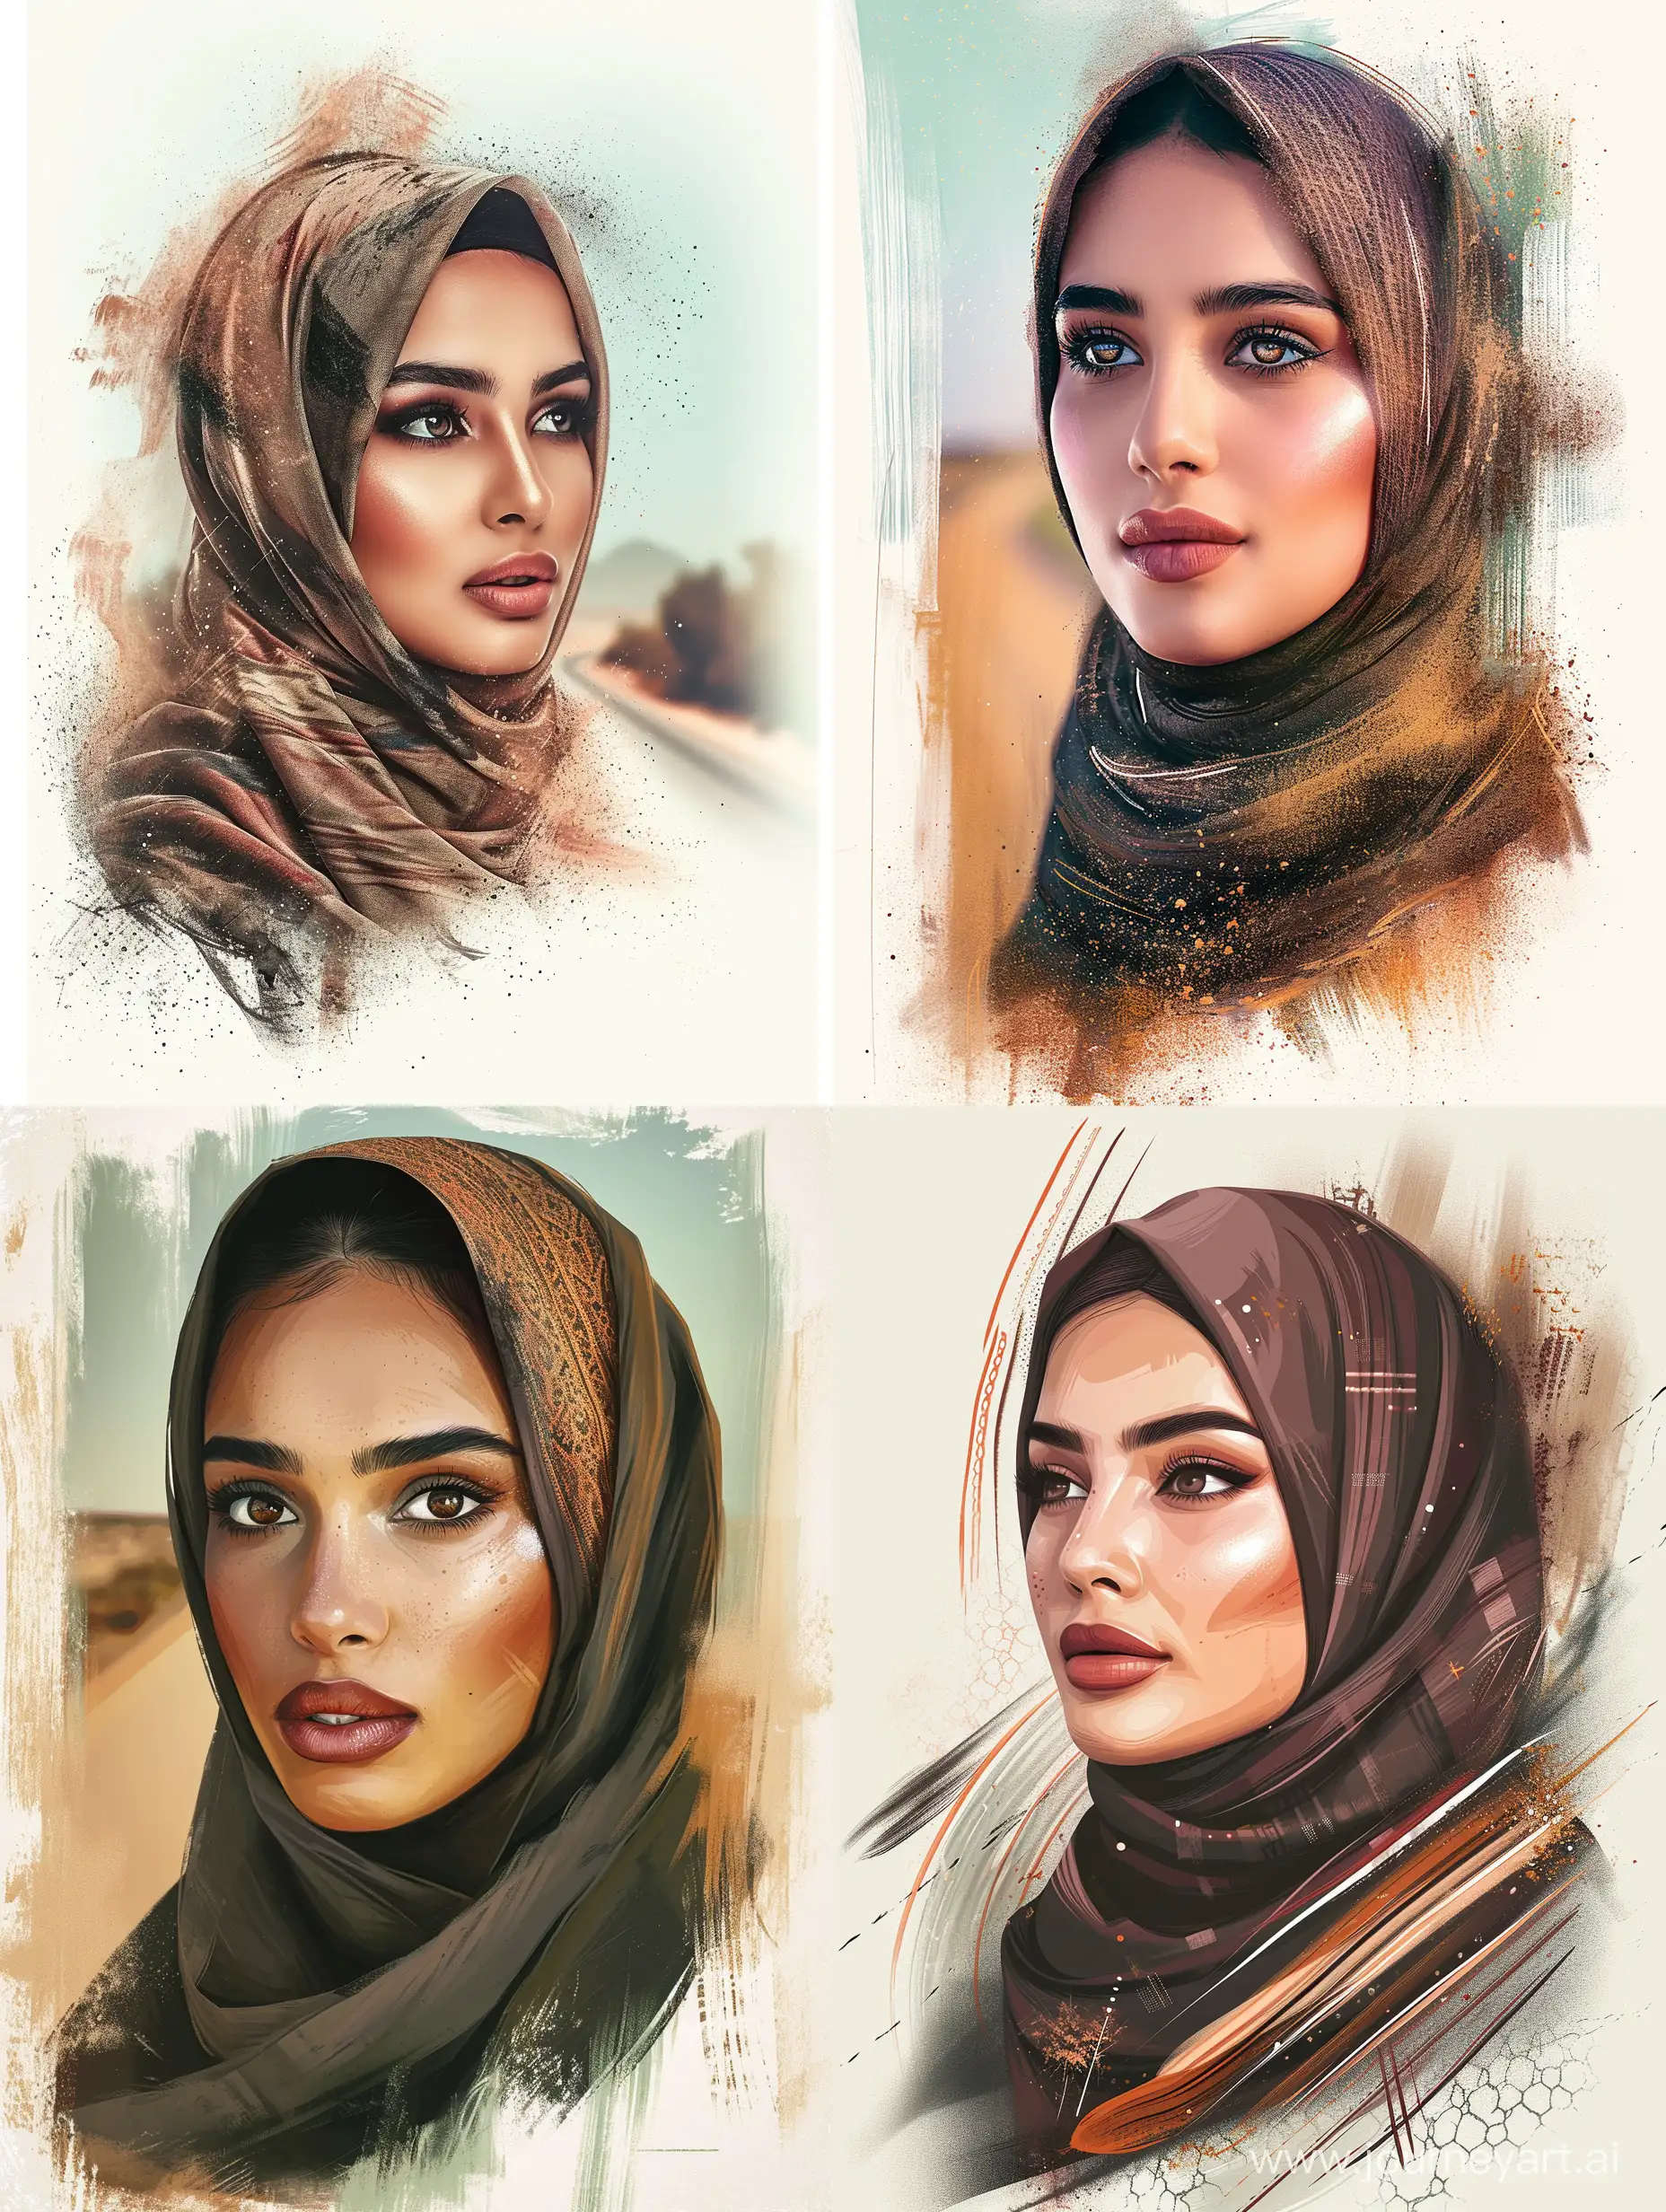 Create a captivating and realistic portrait of a young woman wearing a hijab, who is a cosmetic model in mid-journey. The woman should be portrayed in a way that emphasizes her beauty and grace, while also showcasing the elegance of her hijab. Her face should be the main focus, with particular attention paid to her eyes, which should be expressive and engaging. The makeup on her face should be tastefully applied, highlighting her features and complementing her skin tone. The makeup should be from a range of cosmetic products, including but not limited to, foundation, eyeliner, mascara, blush, and lipstick. The skincare products she uses should also be subtly hinted at, perhaps through the glow of her skin or the freshness of her complexion. The design should convey the message that these products enhance her natural beauty rather than define it. The hijab she wears should be stylish and modern, reflecting her personal style and the fashion-forward nature of the brand she represents. The color and pattern of the hijab can be chosen to complement the makeup colors and the overall color scheme of the design. The background should be minimalist, ensuring that the focus remains on the woman and the products she represents. However, it can contain subtle elements that hint at her journey, such as a road or path, or symbols that represent growth and progress. The overall design should be vibrant and appealing, with a balance between realism and artistic interpretation. It should celebrate the diversity and beauty of Muslim women, and promote the cosmetic brand in a positive and inclusive manne